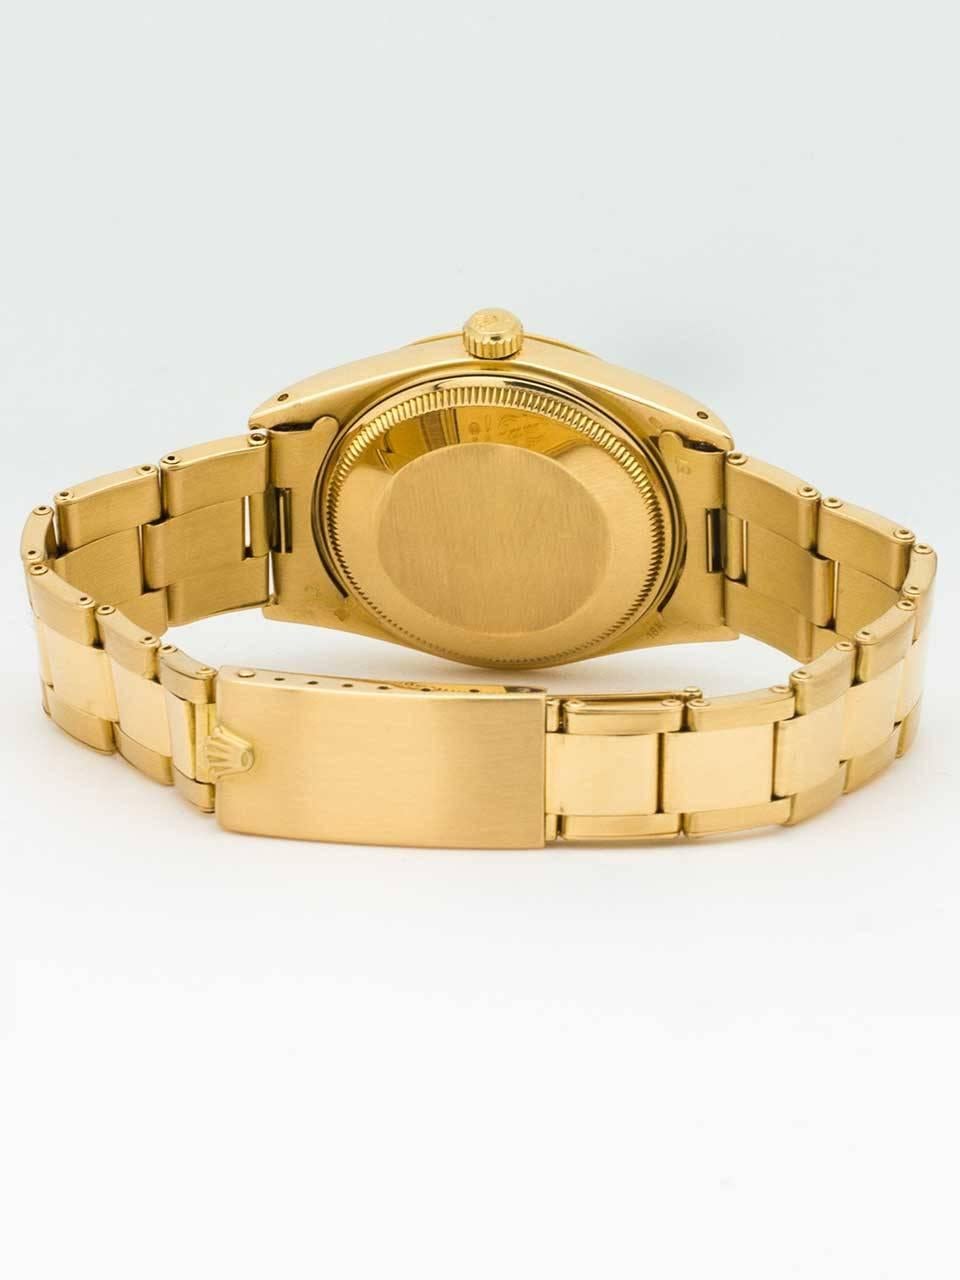 Men's Rolex Yellow Gold Oyster Perpetual Date Wristwatch Ref 15038